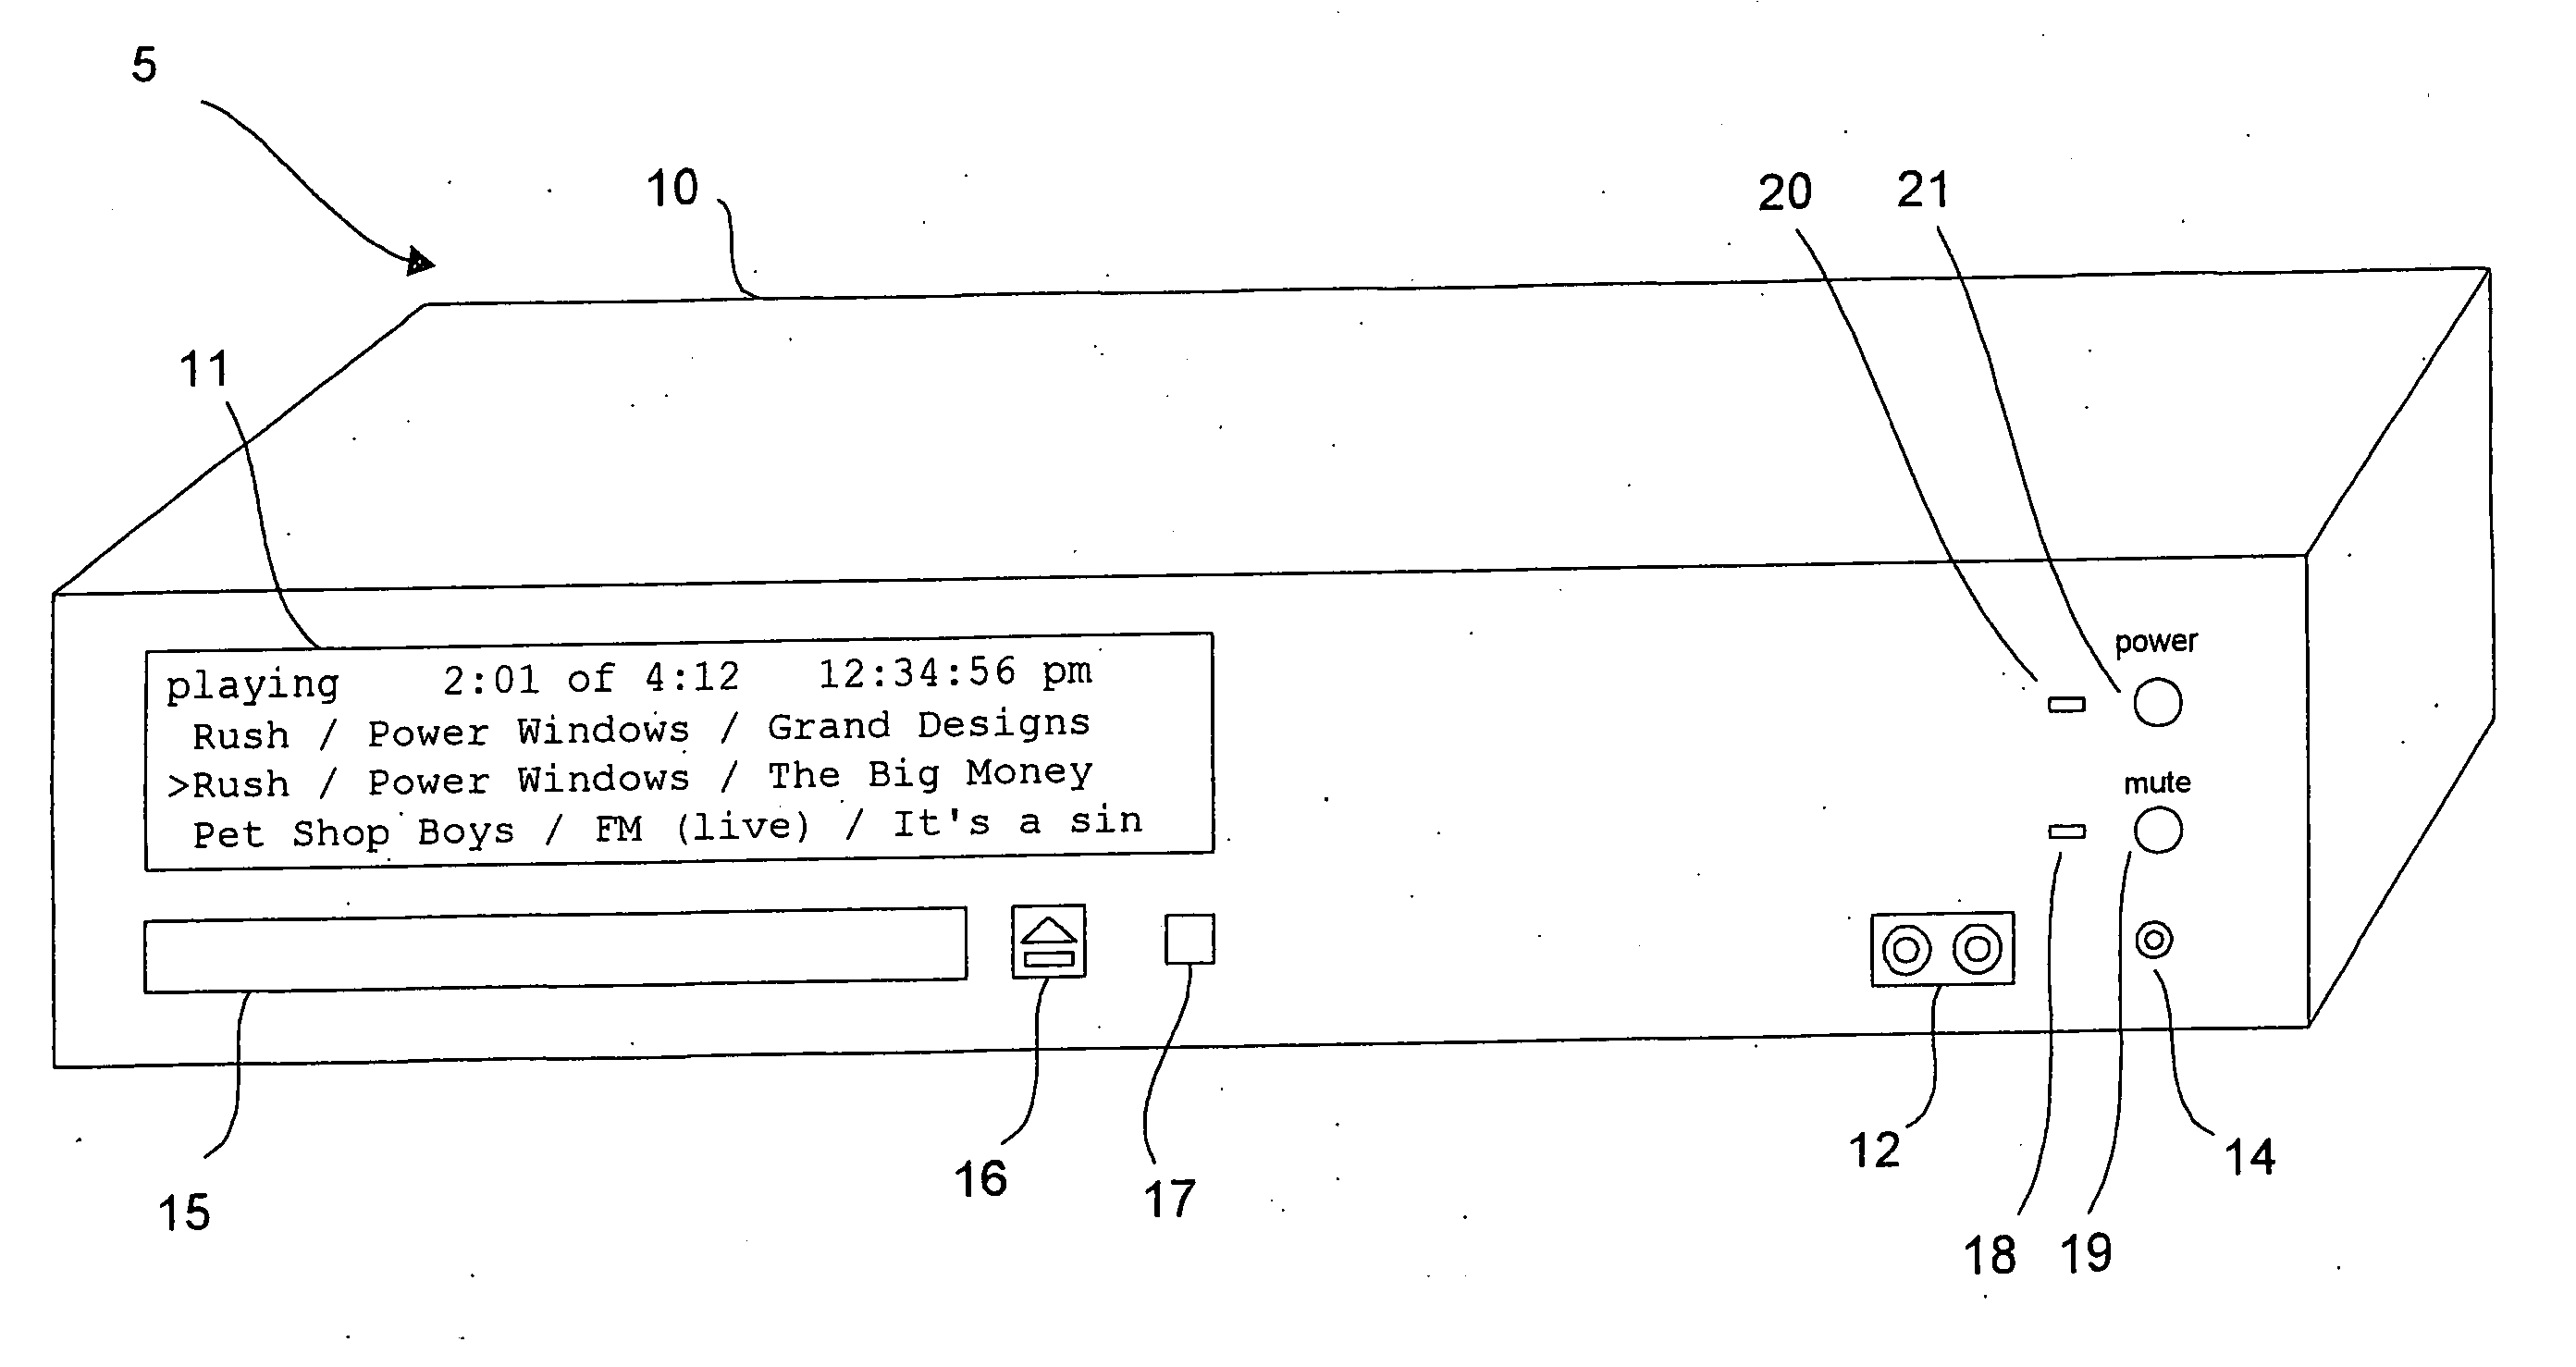 Audio entertainment system for storing and playing audio information